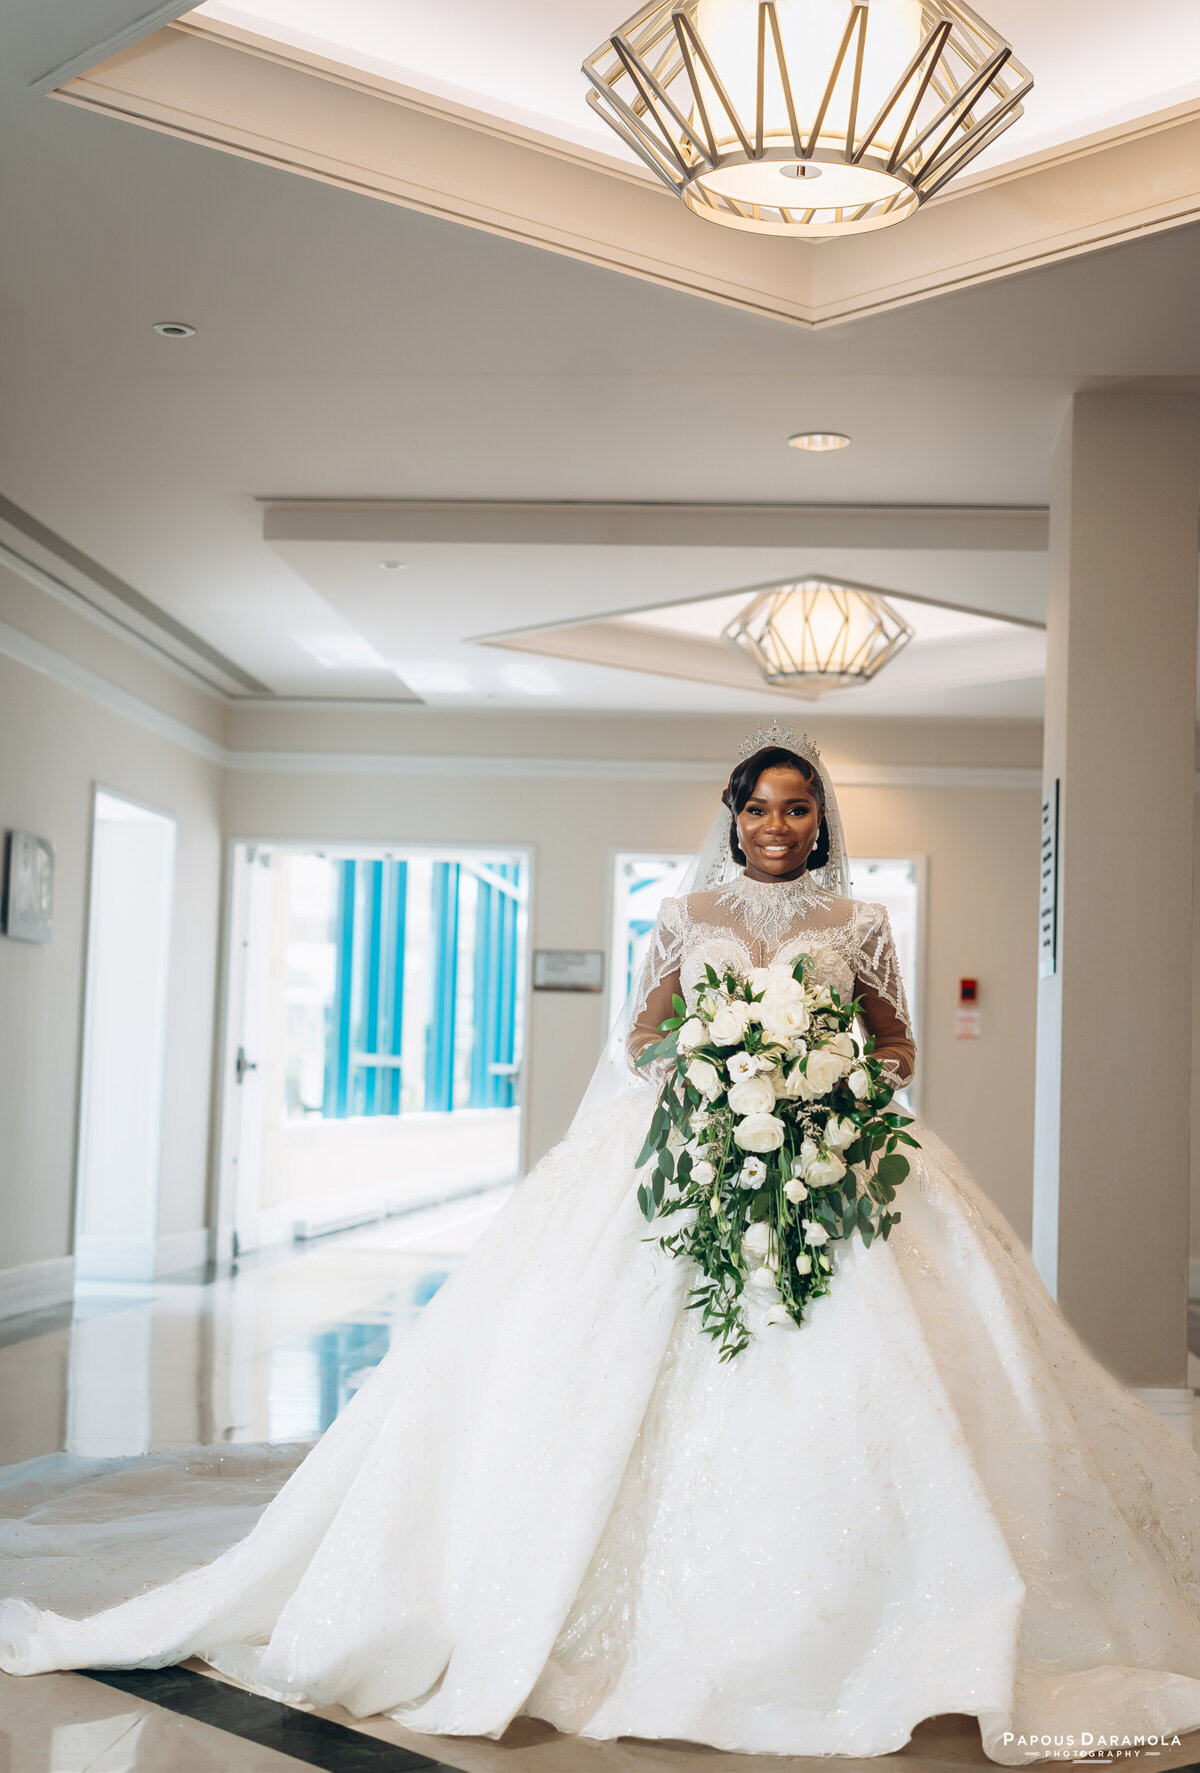 Abigail and Abije Oruka Events Papouse photographer Wedding event planners Toronto planner African Nigerian Eyitayo Dada Dara Ayoola outdoor ceremony floral princess ballgown rolls royce groom suit potraits  paradise banquet hall vaughn 125